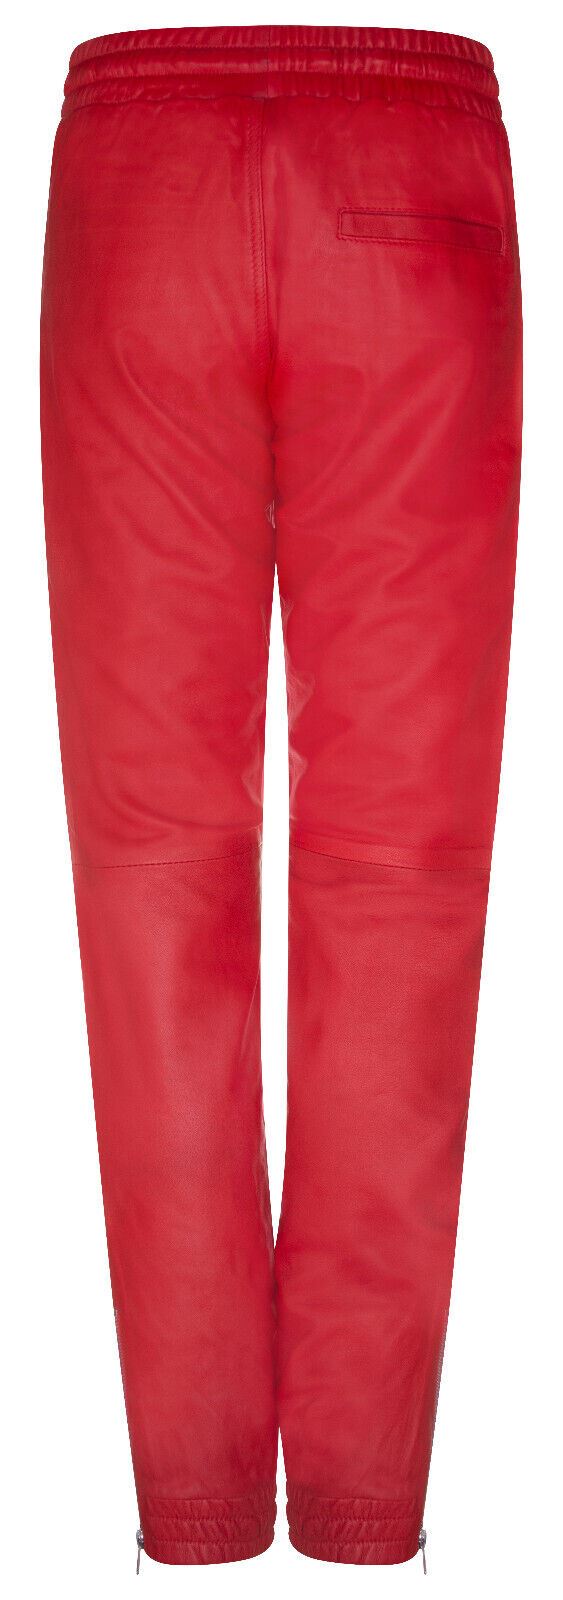 Women's Red Nappa Leather Trousers Joggers